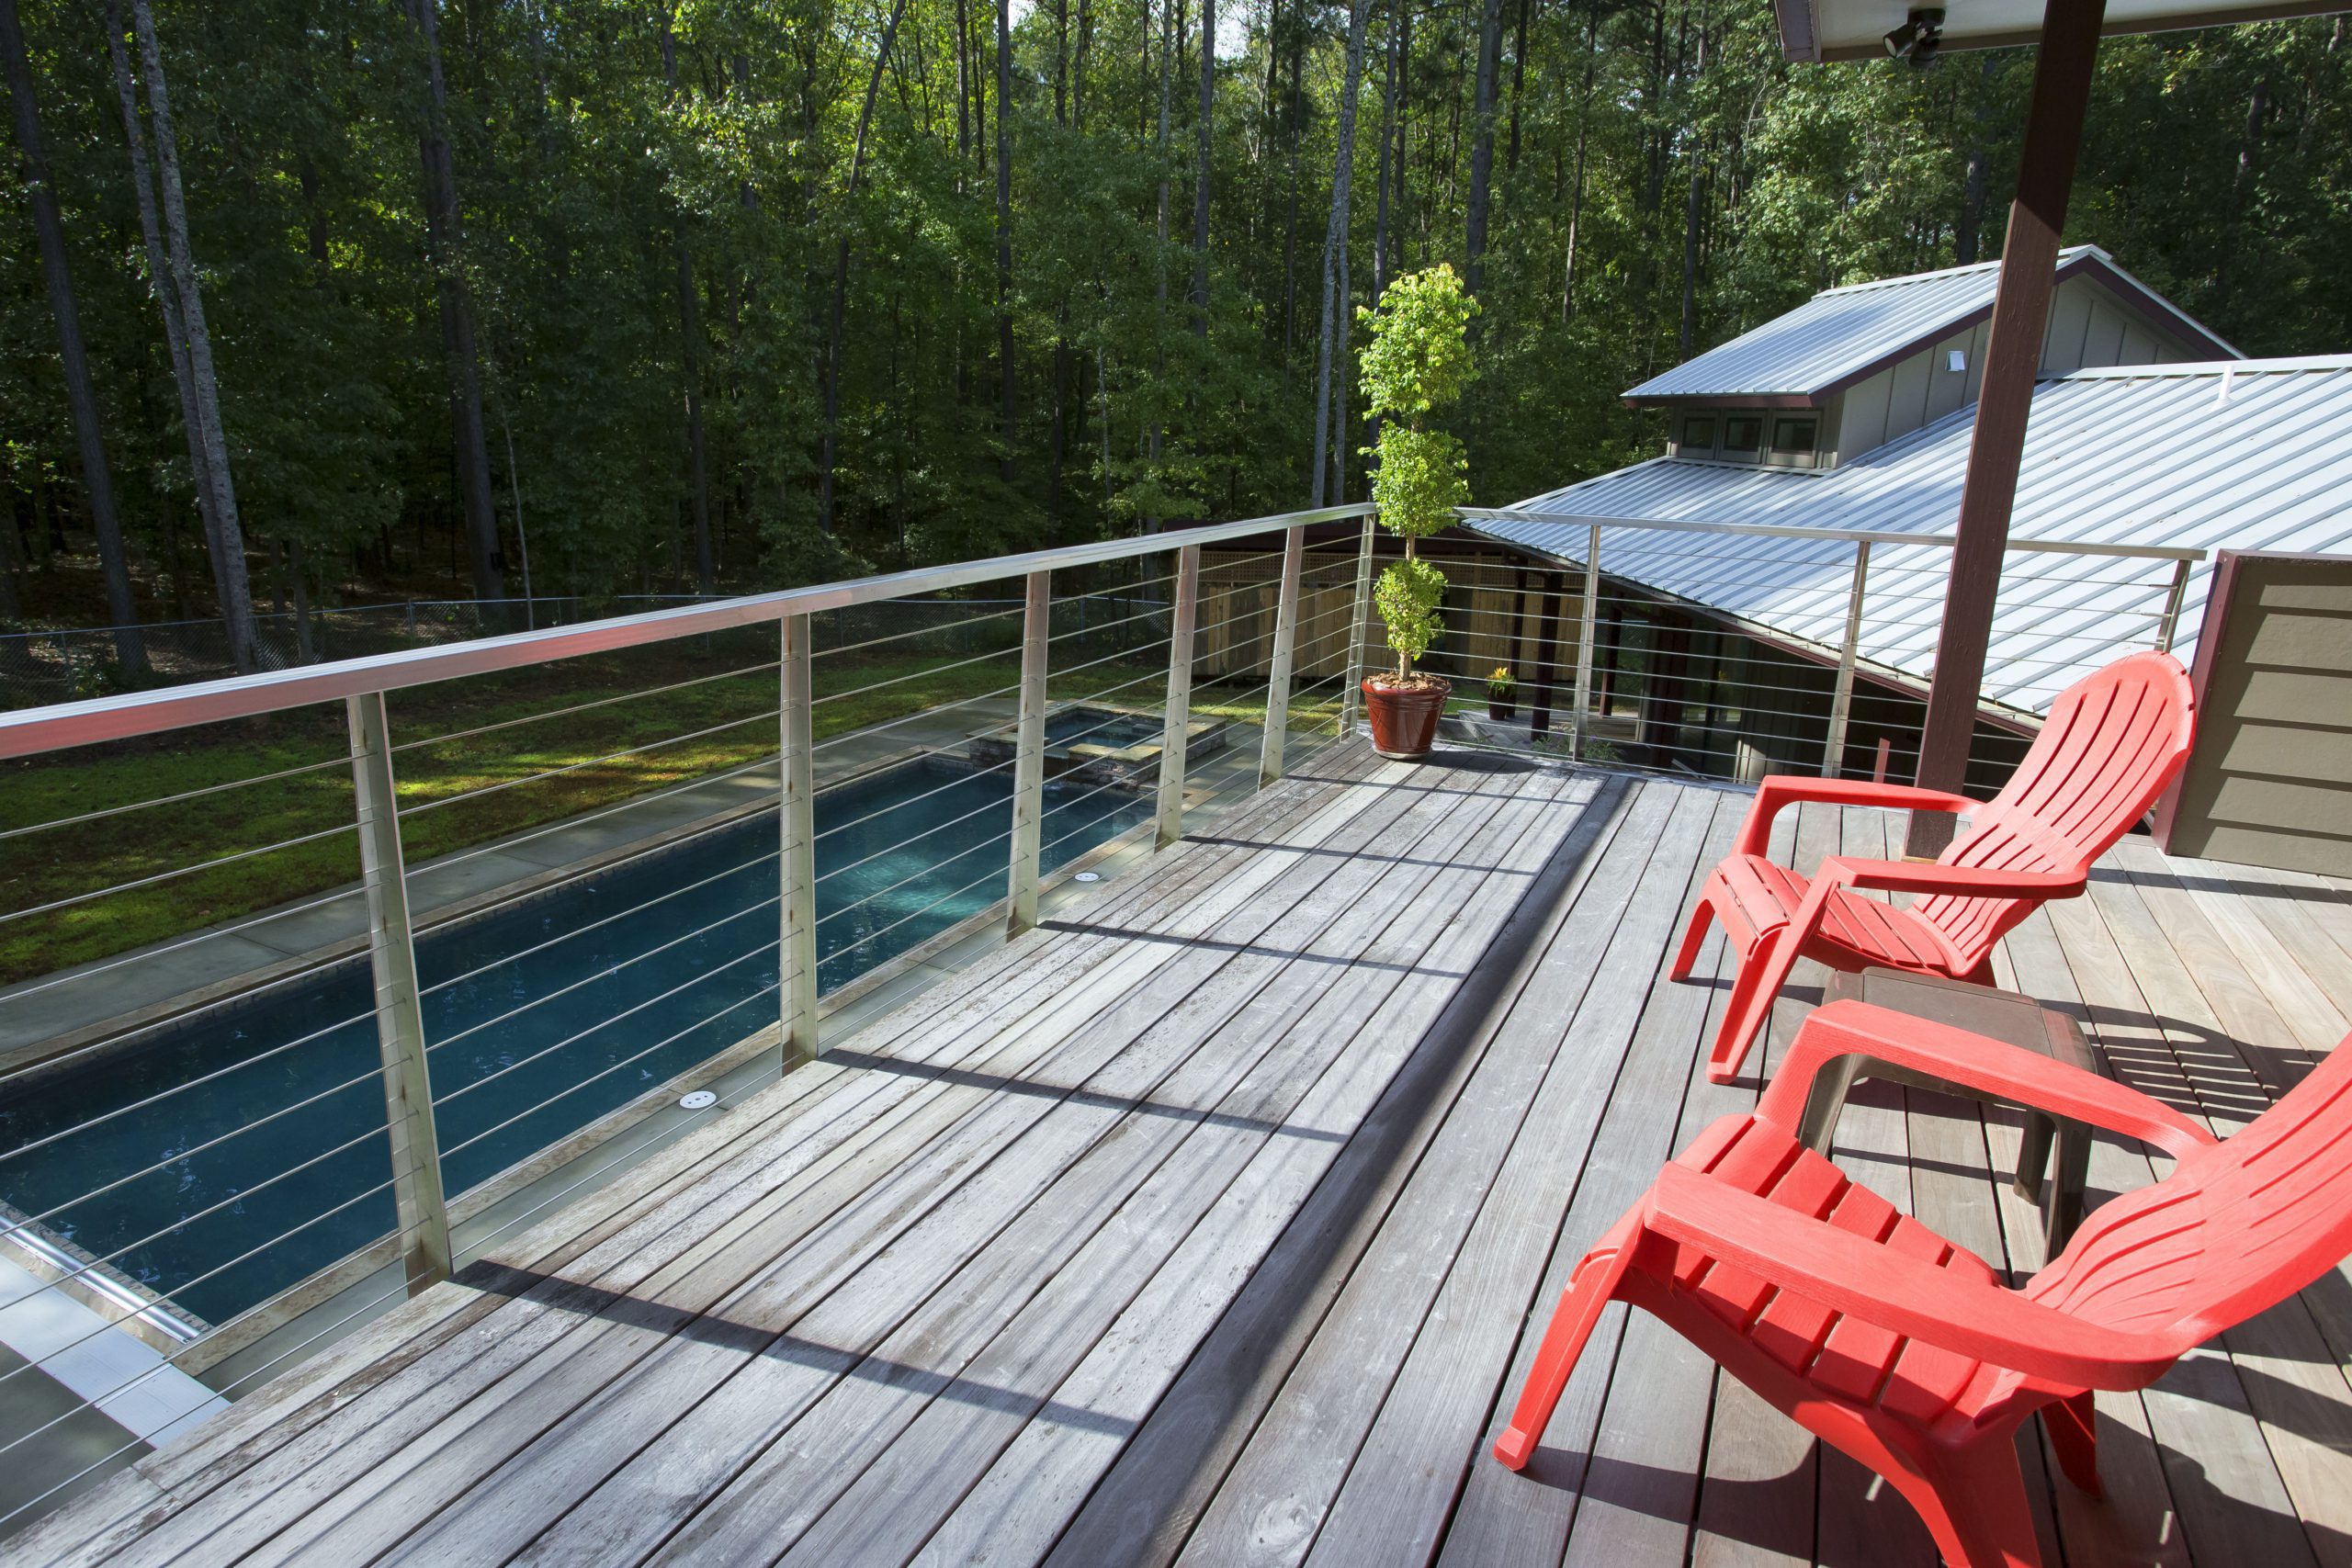 Large upper level terrace with cable railing overlooking pool nestled in the forest